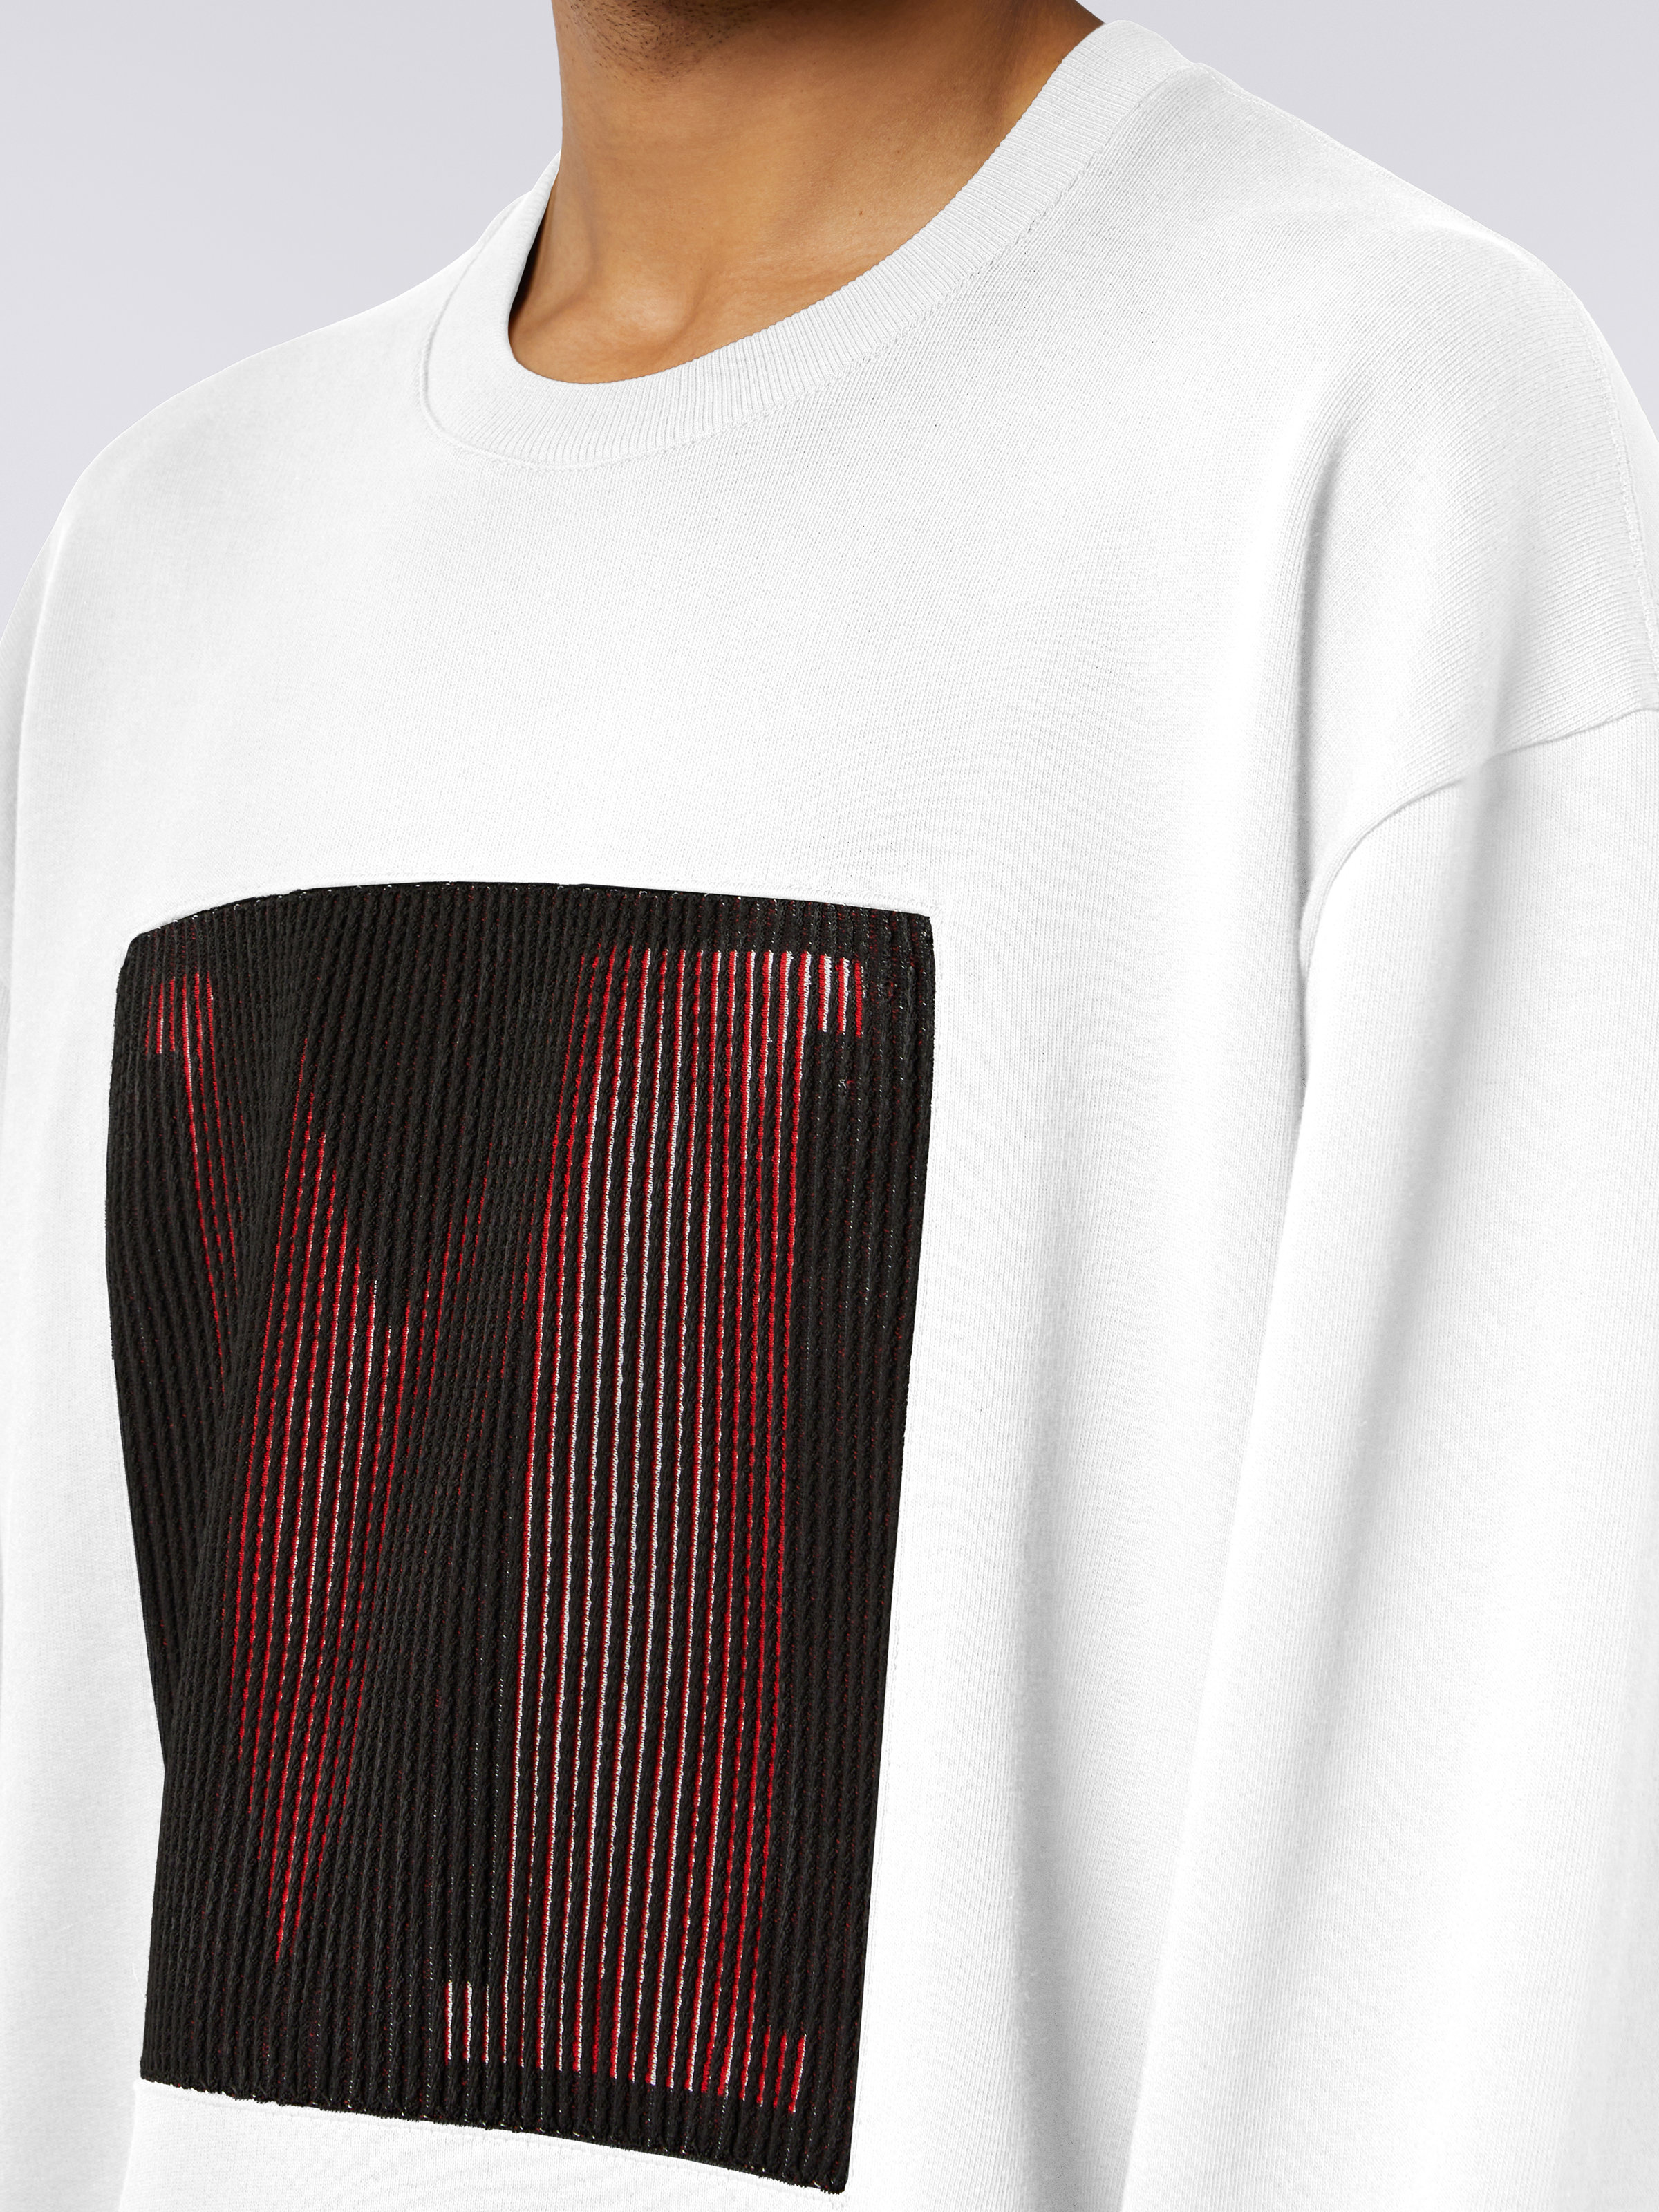 Cotton crew-neck sweatshirt with macro logo in collaboration with Mike Maignan, White - 4